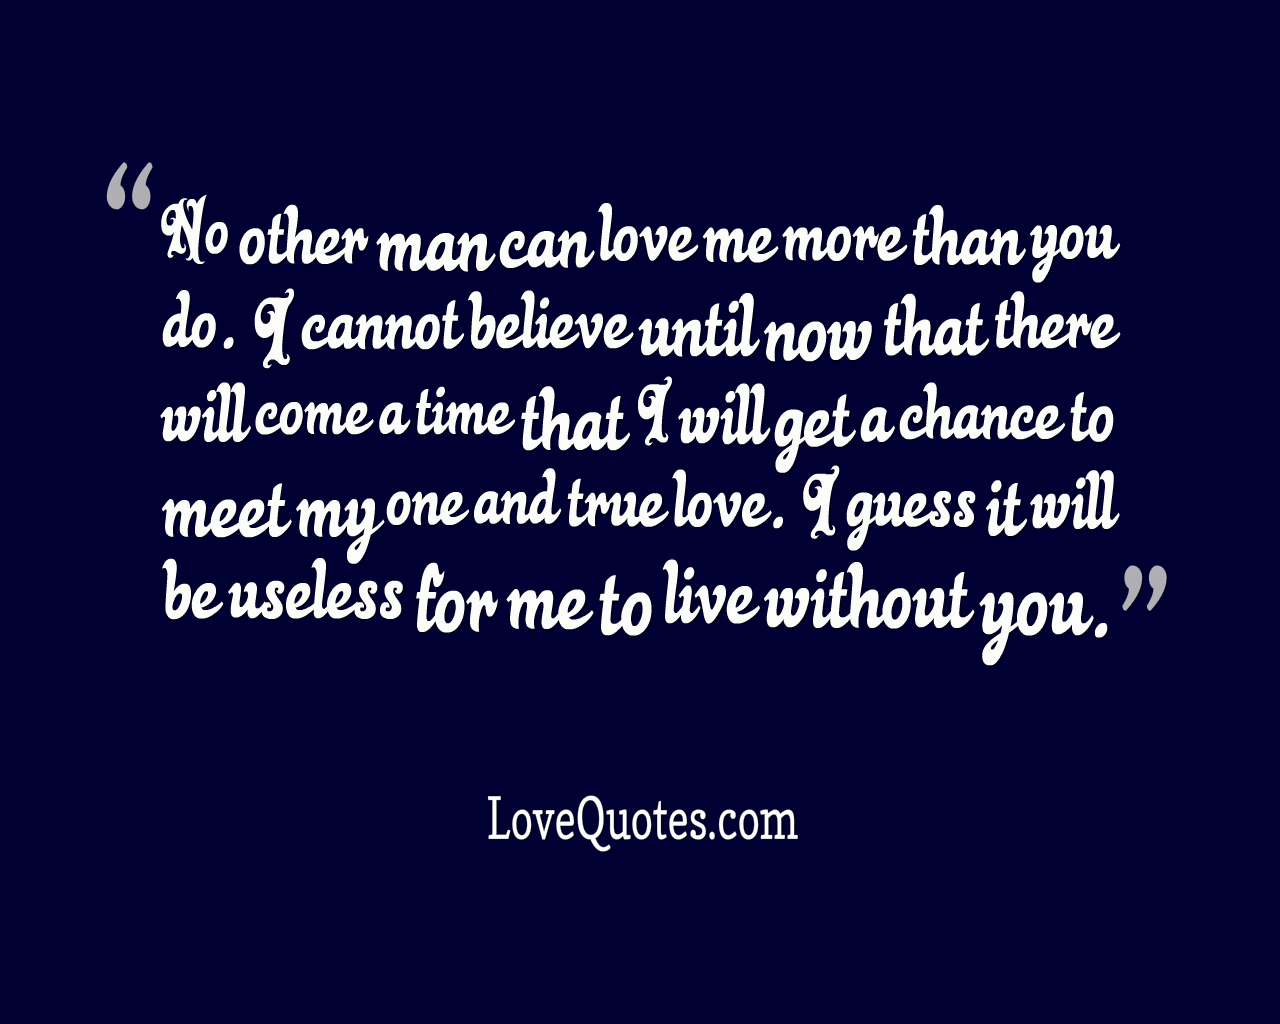 No Other Man - Love Quotes